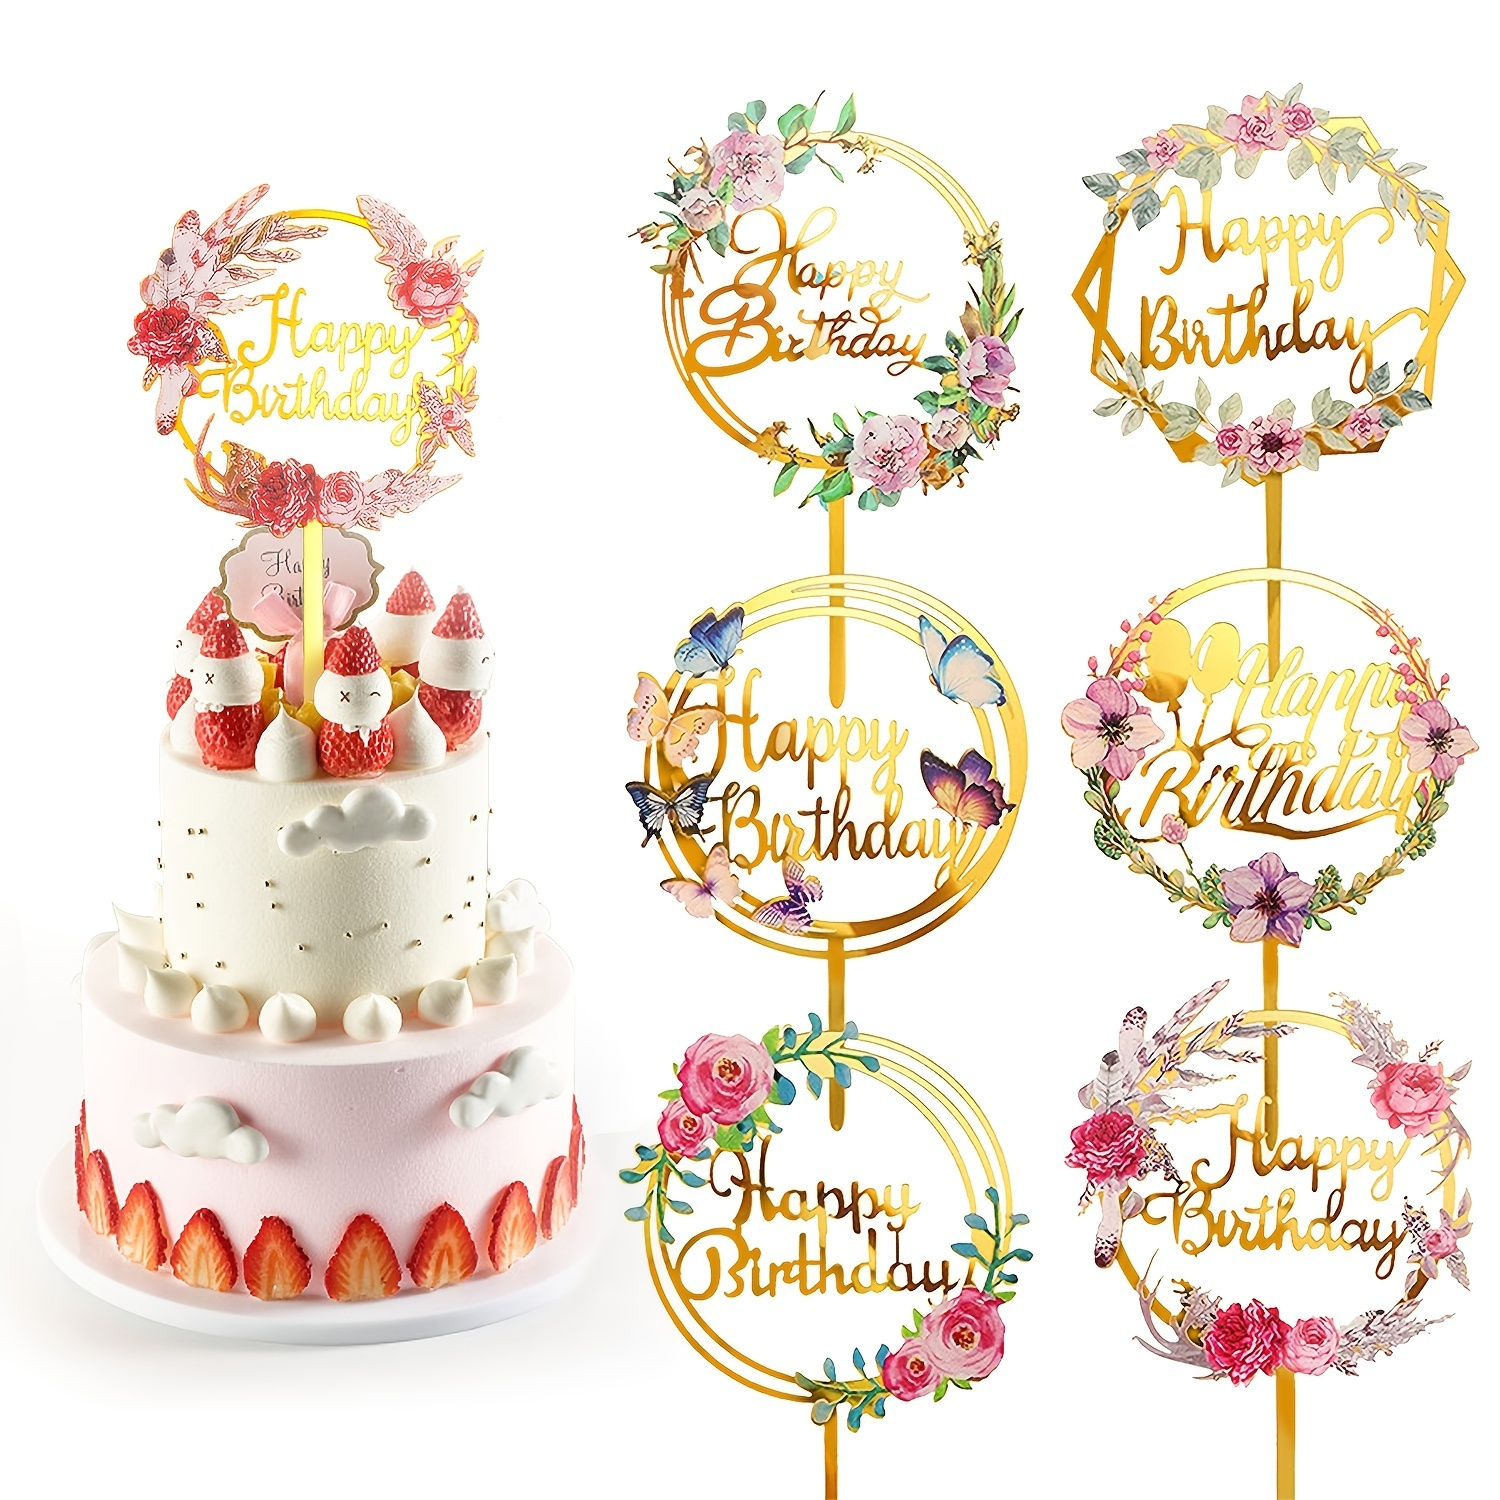 

6pcs, Happy Birthday Cake Topper, Multi-patterned Acrylic Cupcake Topper For Birthday Cake Decoration Party